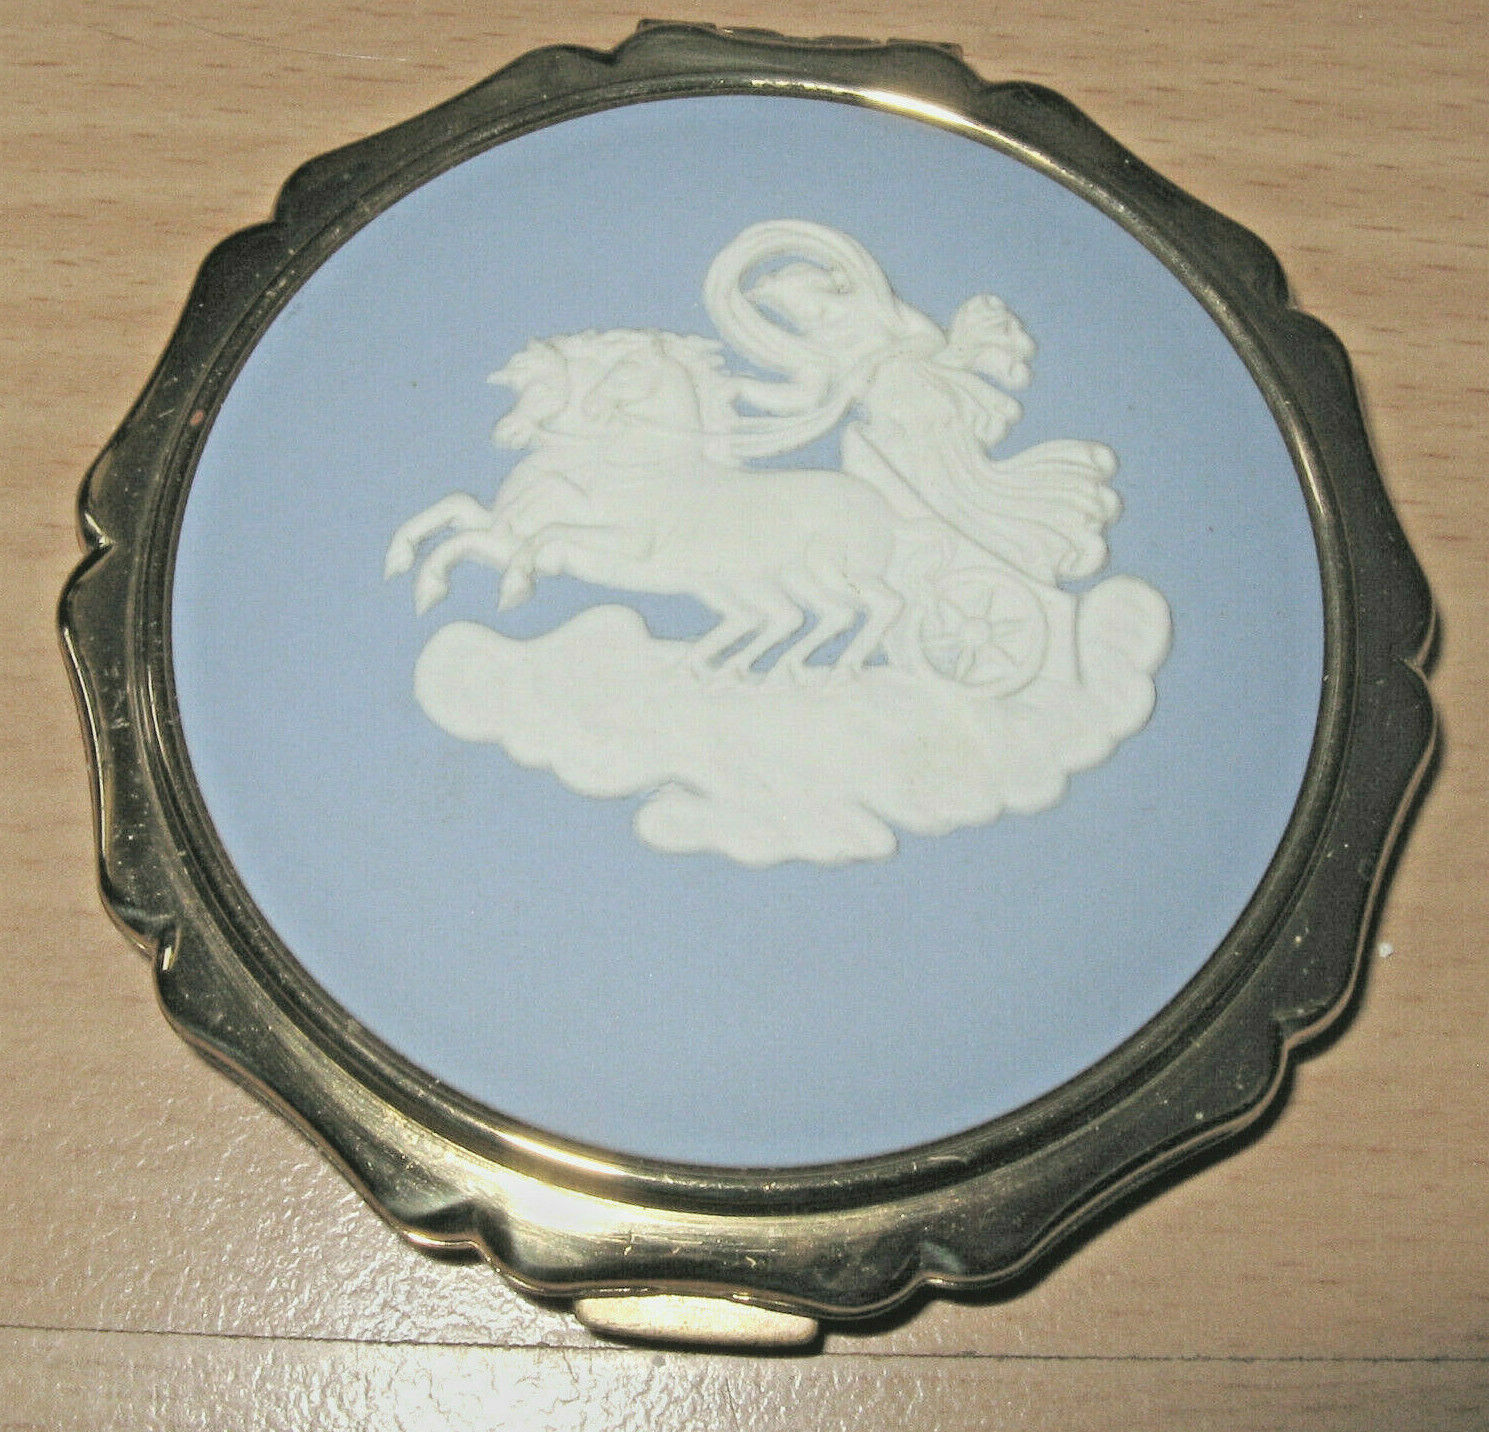 Jasperware Wedgwood Stratton Powder Compact Woman & Chariot Unused with tags